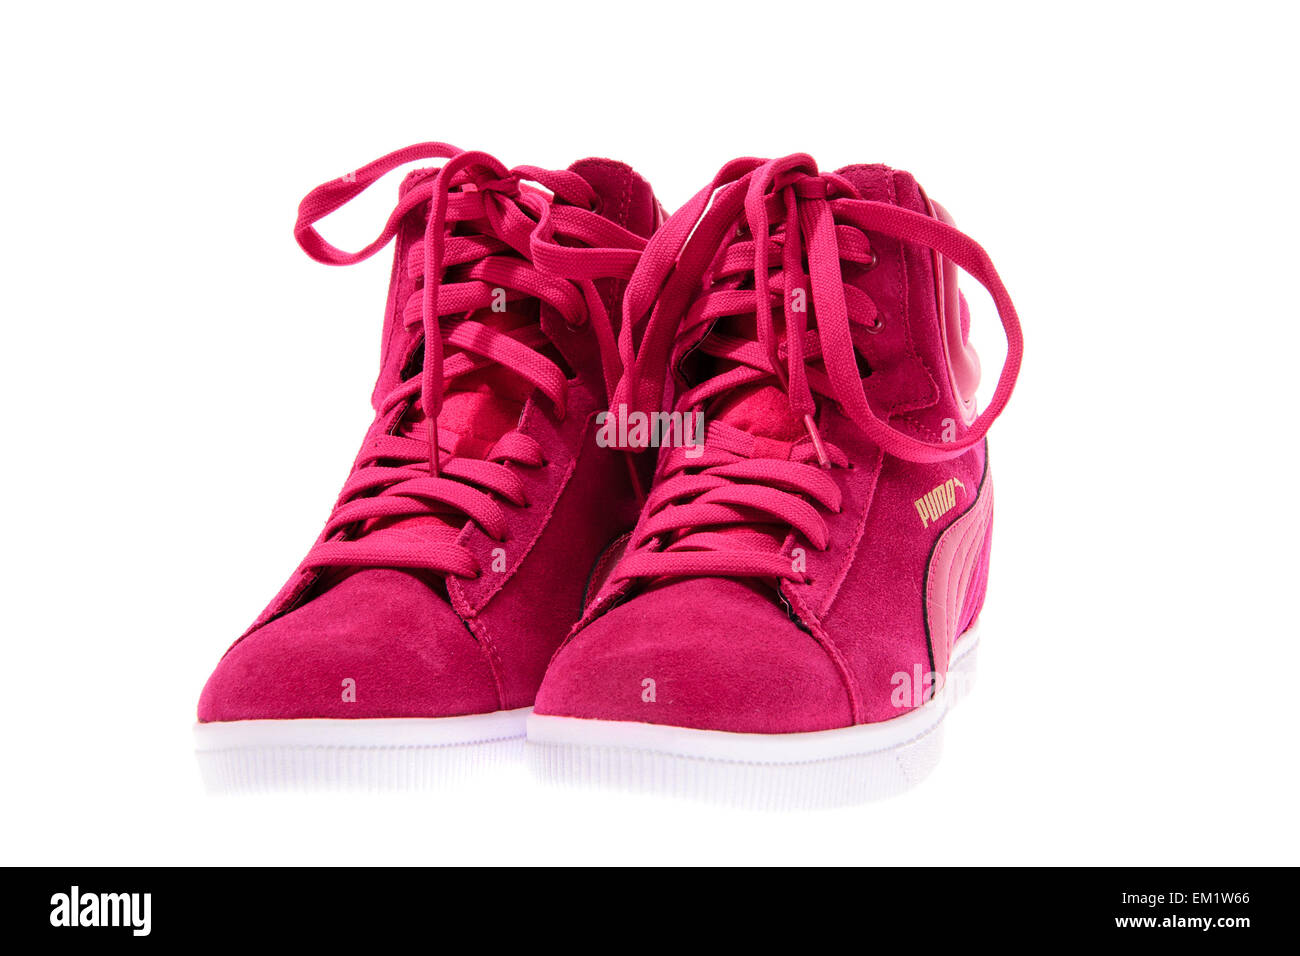 Minsk, Belarus - March 2015: Pink Female Beautiful Shoes Puma High Heels. Isolated on White Background. Puma - a German Stock Photo - Alamy